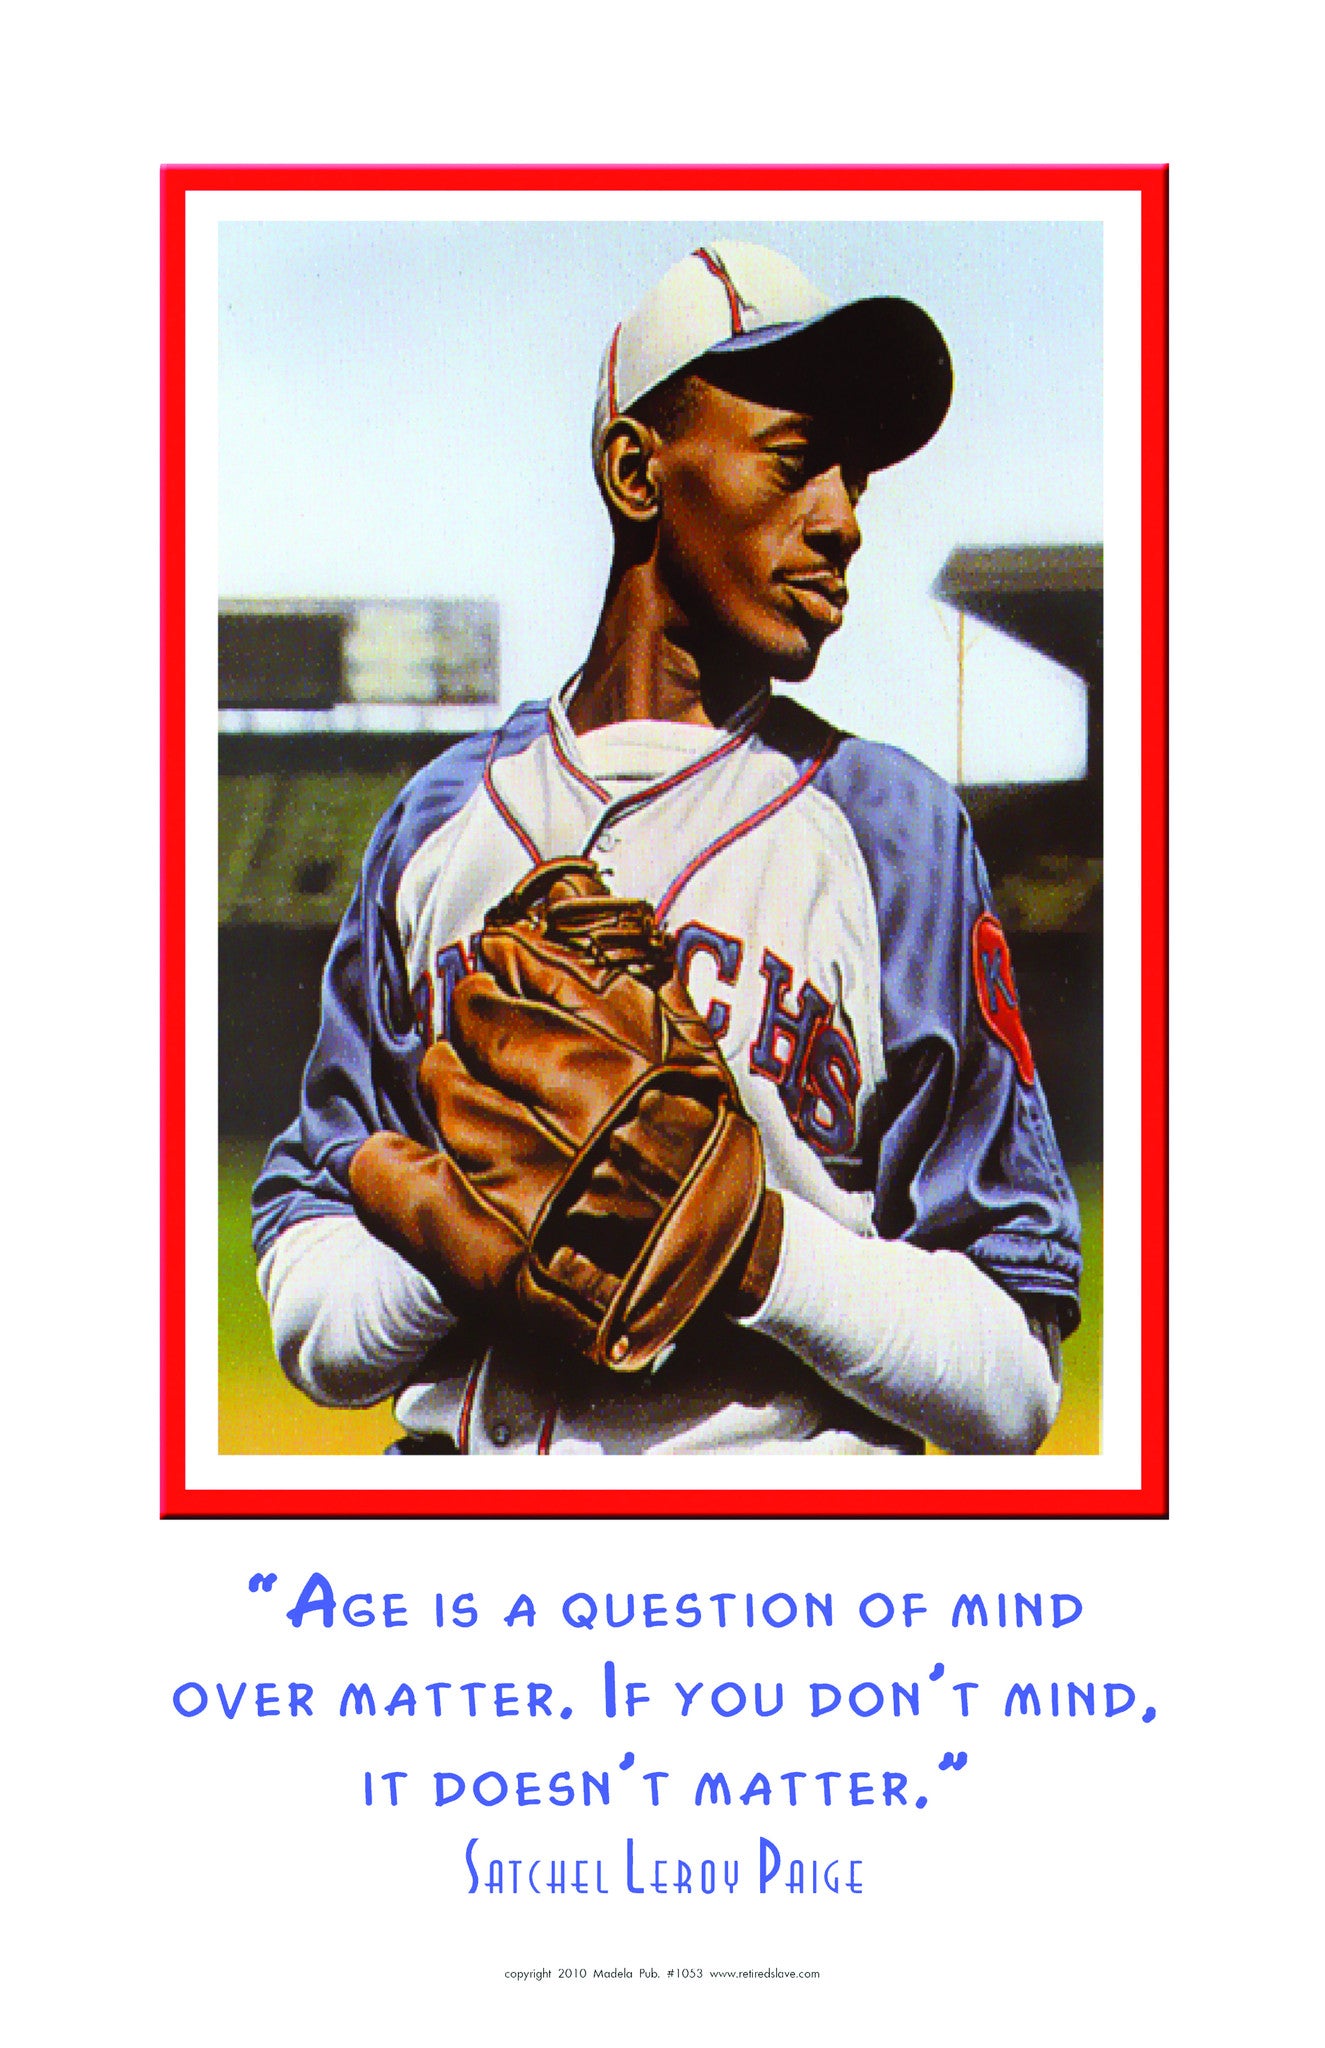 African American historical posters. Baseball's Methuselah, LeRoy Satchel  Paige was a charismatic pitching star of the Negro Leagues who became a  major league rookie in his forties. Paige began playing professionally for